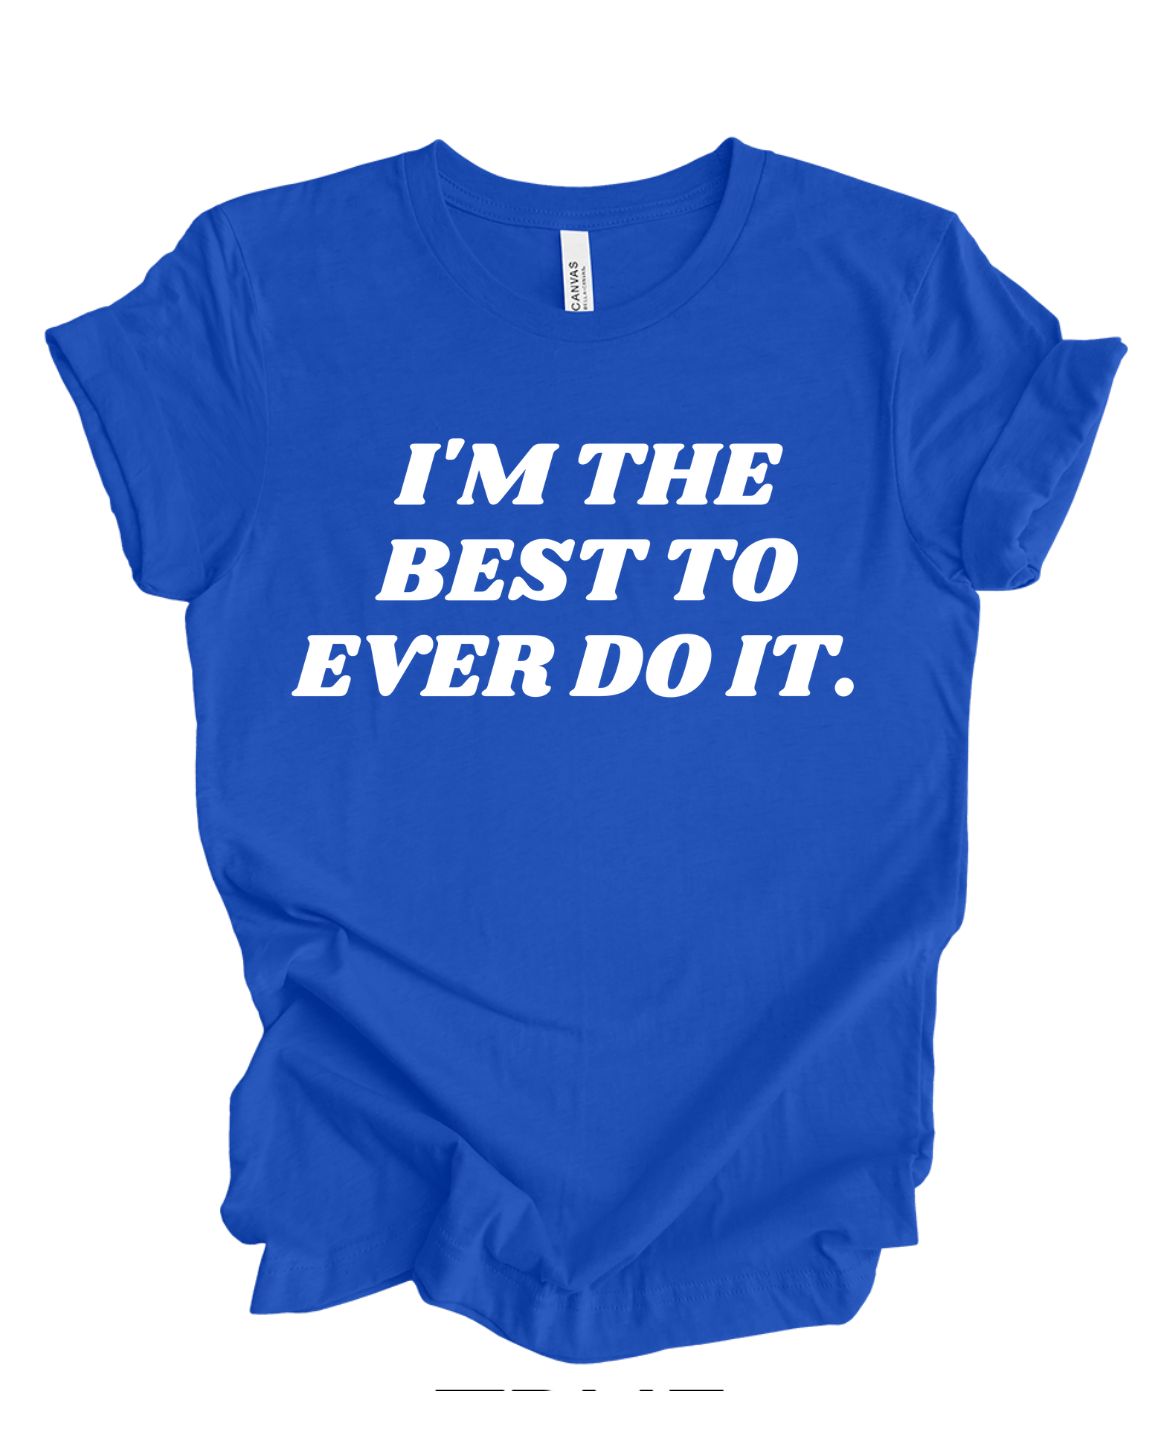 I'm the best to ever do it T-shirt